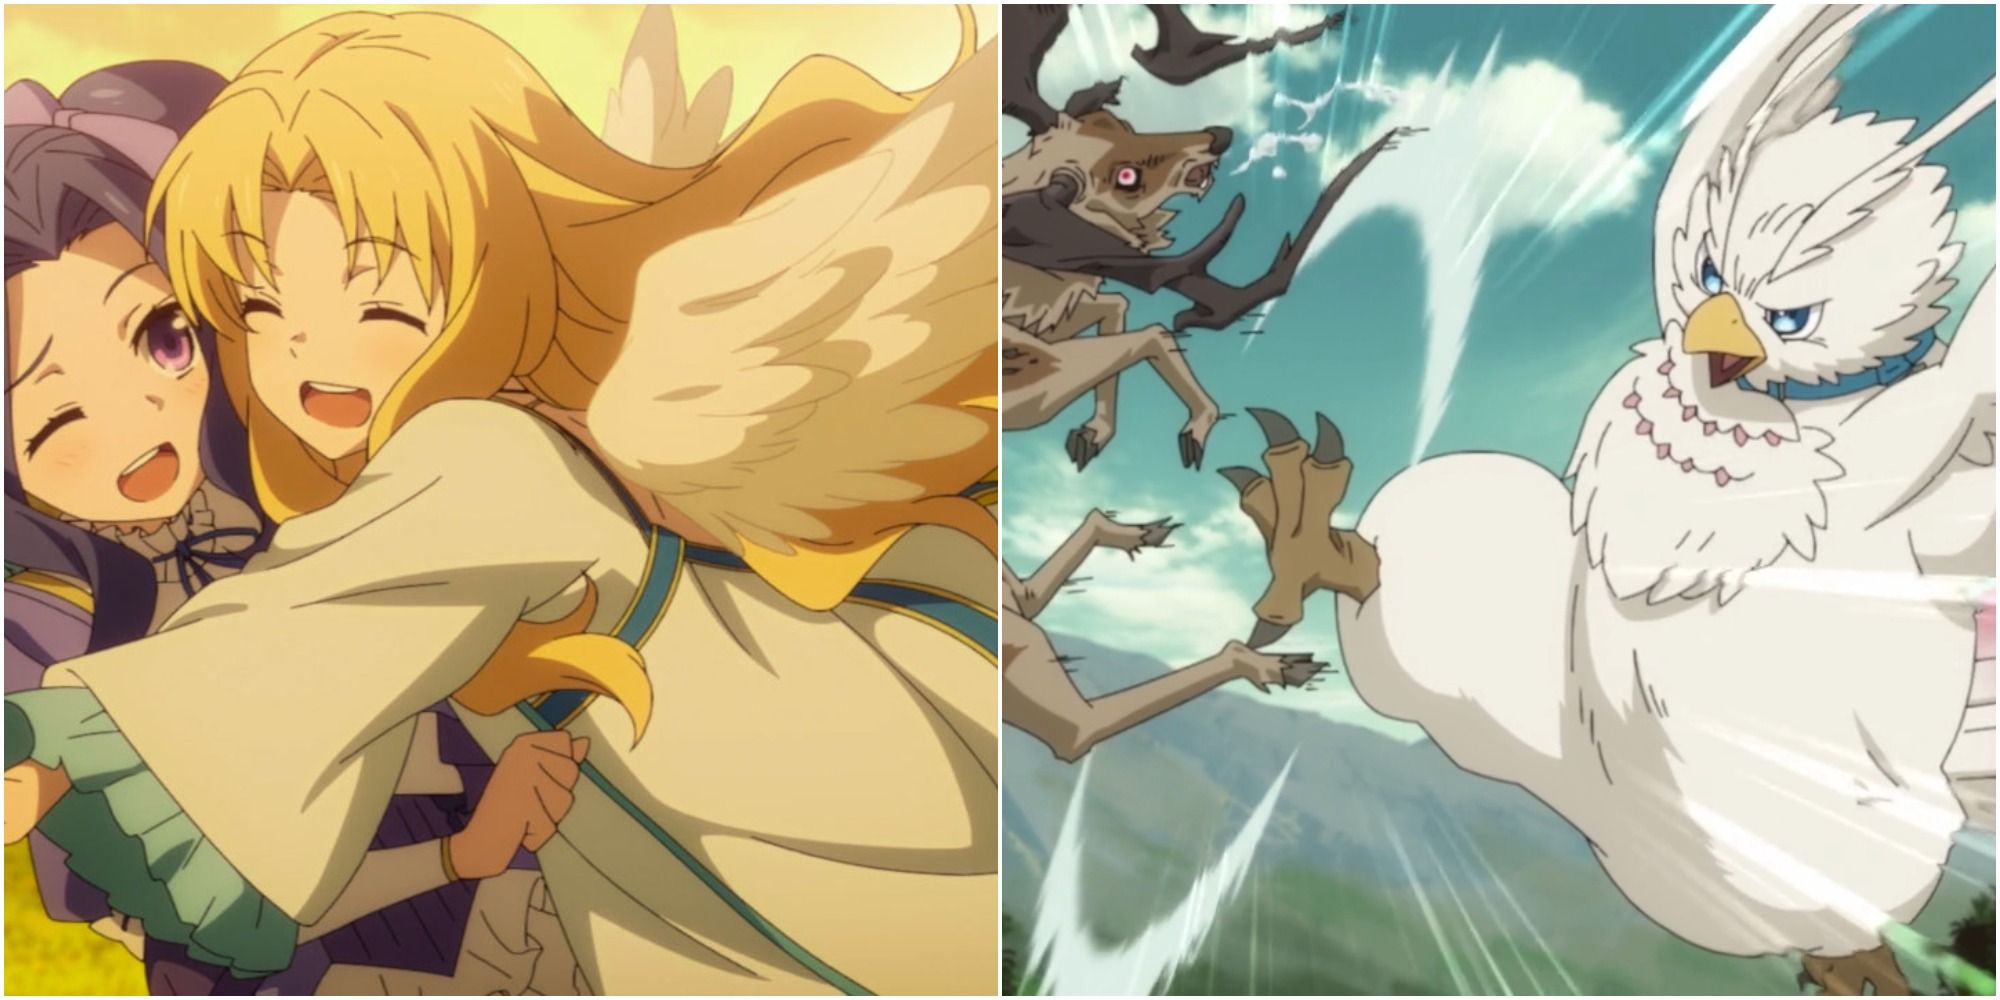 Filo Hugging Melty In Human Form And Fighting In Bird Form In The Rising Of The Shield Hero Anime